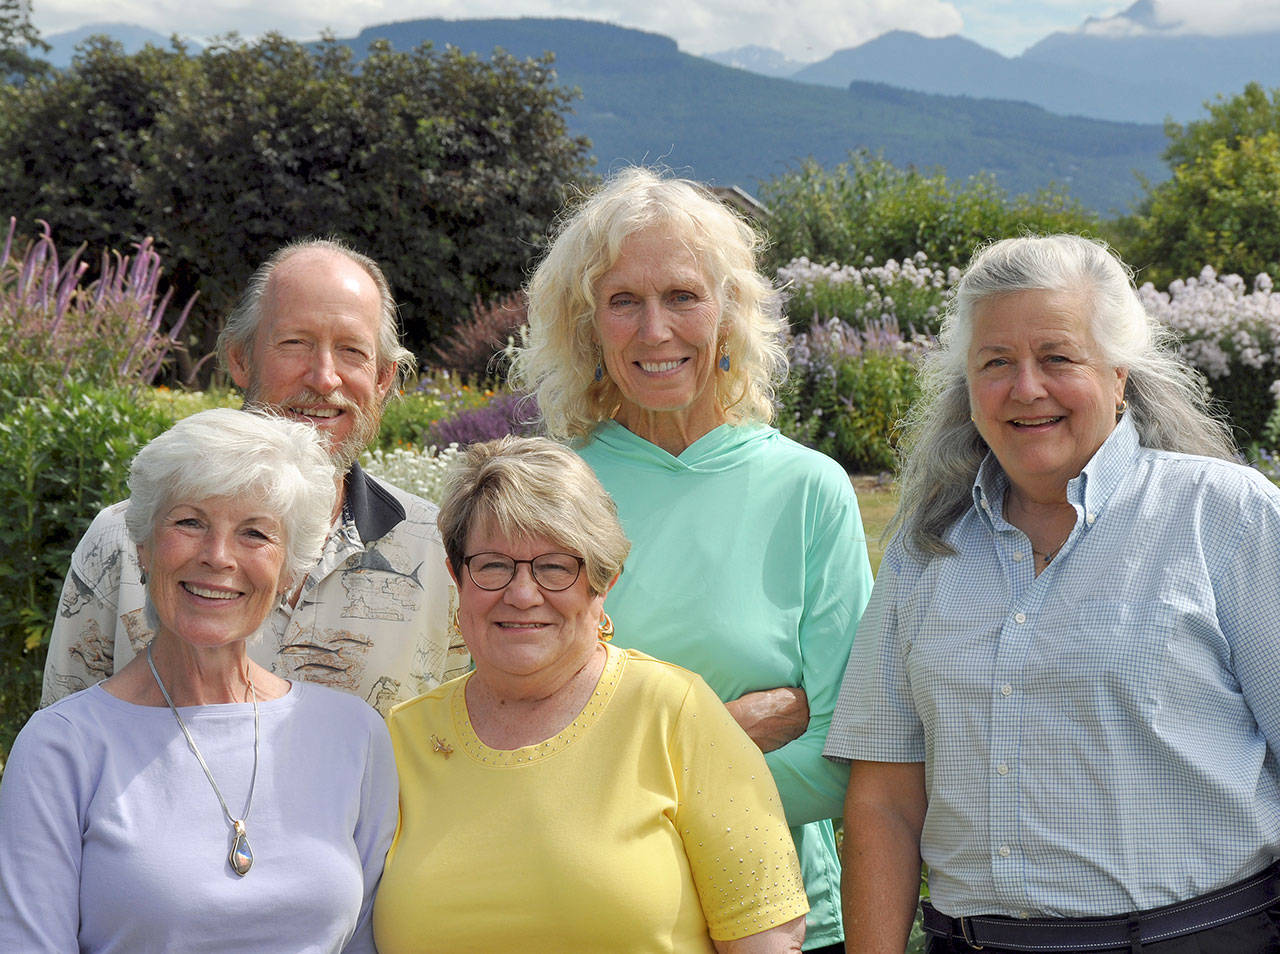 ARTfusion artists this year include (back row, from left) Dan LaChaussee, Jinx Bryant, Catherine Mix, with (from left) Paulette Hill and Tuttie Peetz. Submitted photo